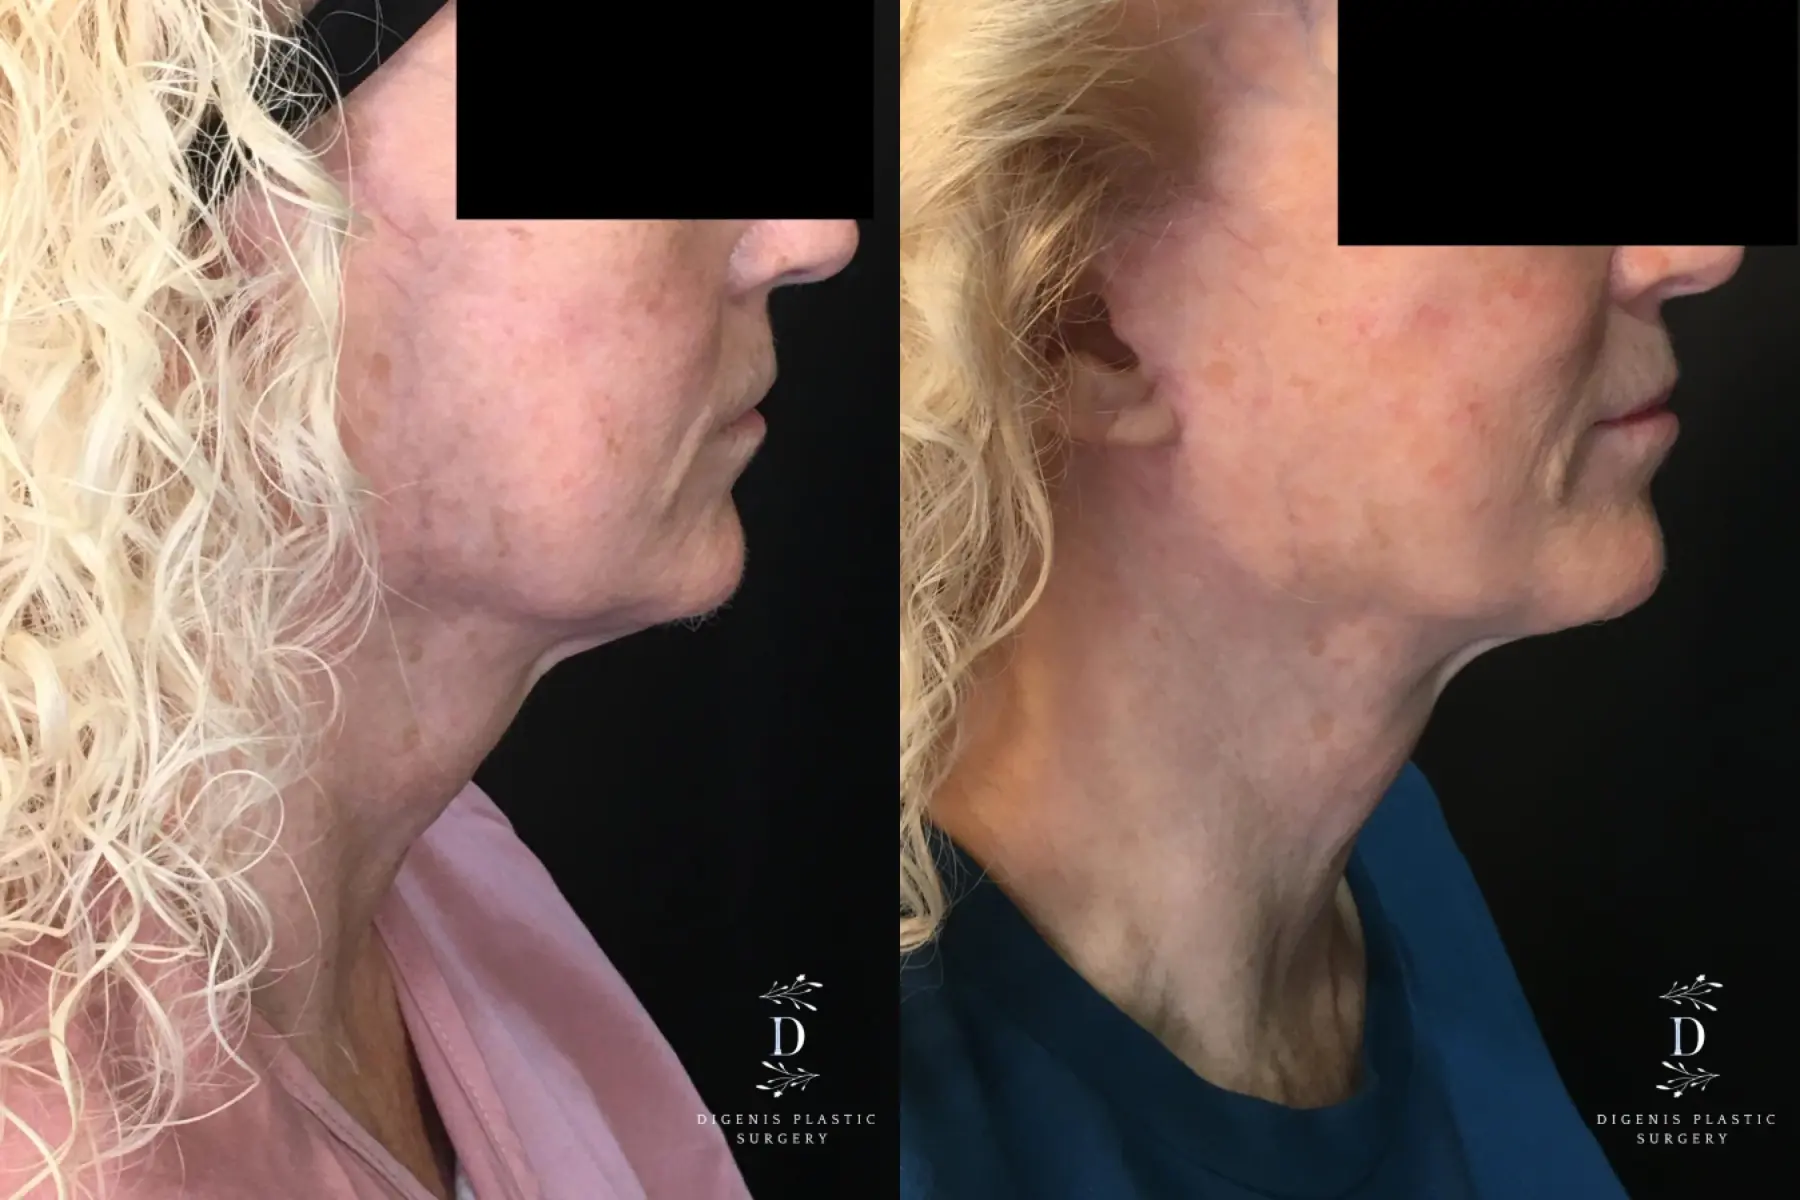 Neck Lift: Patient 1 - Before and After 3